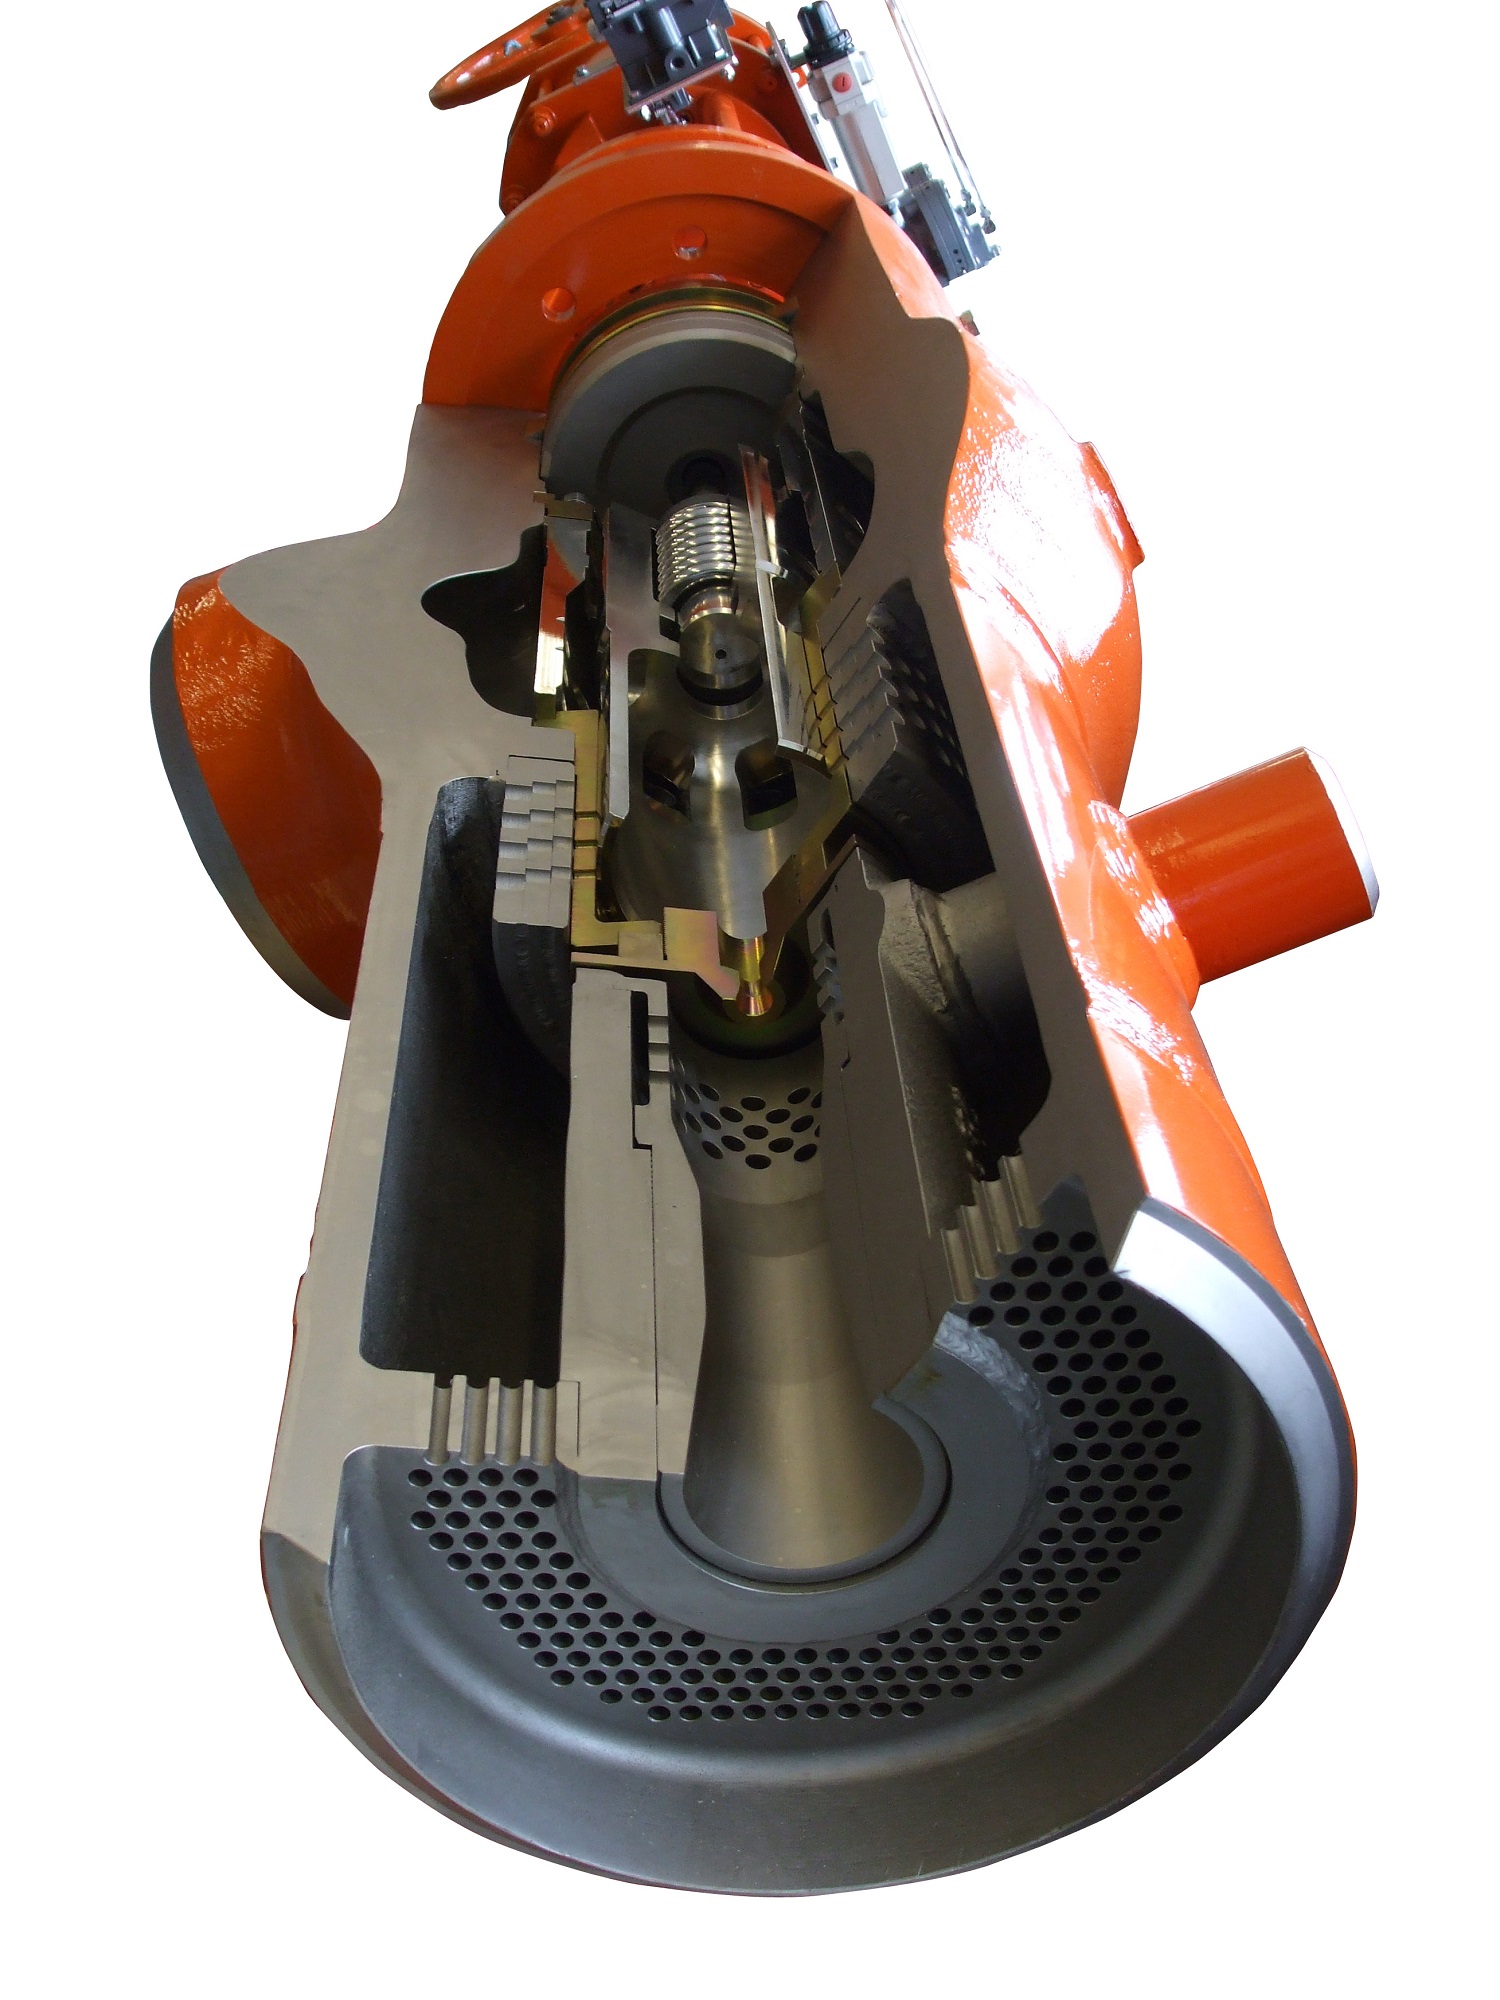 The Copes-Vulcan DSCV-SA is designed for isolation of the steam flow in turbine bypass applications where valves remain closed for long periods of time.